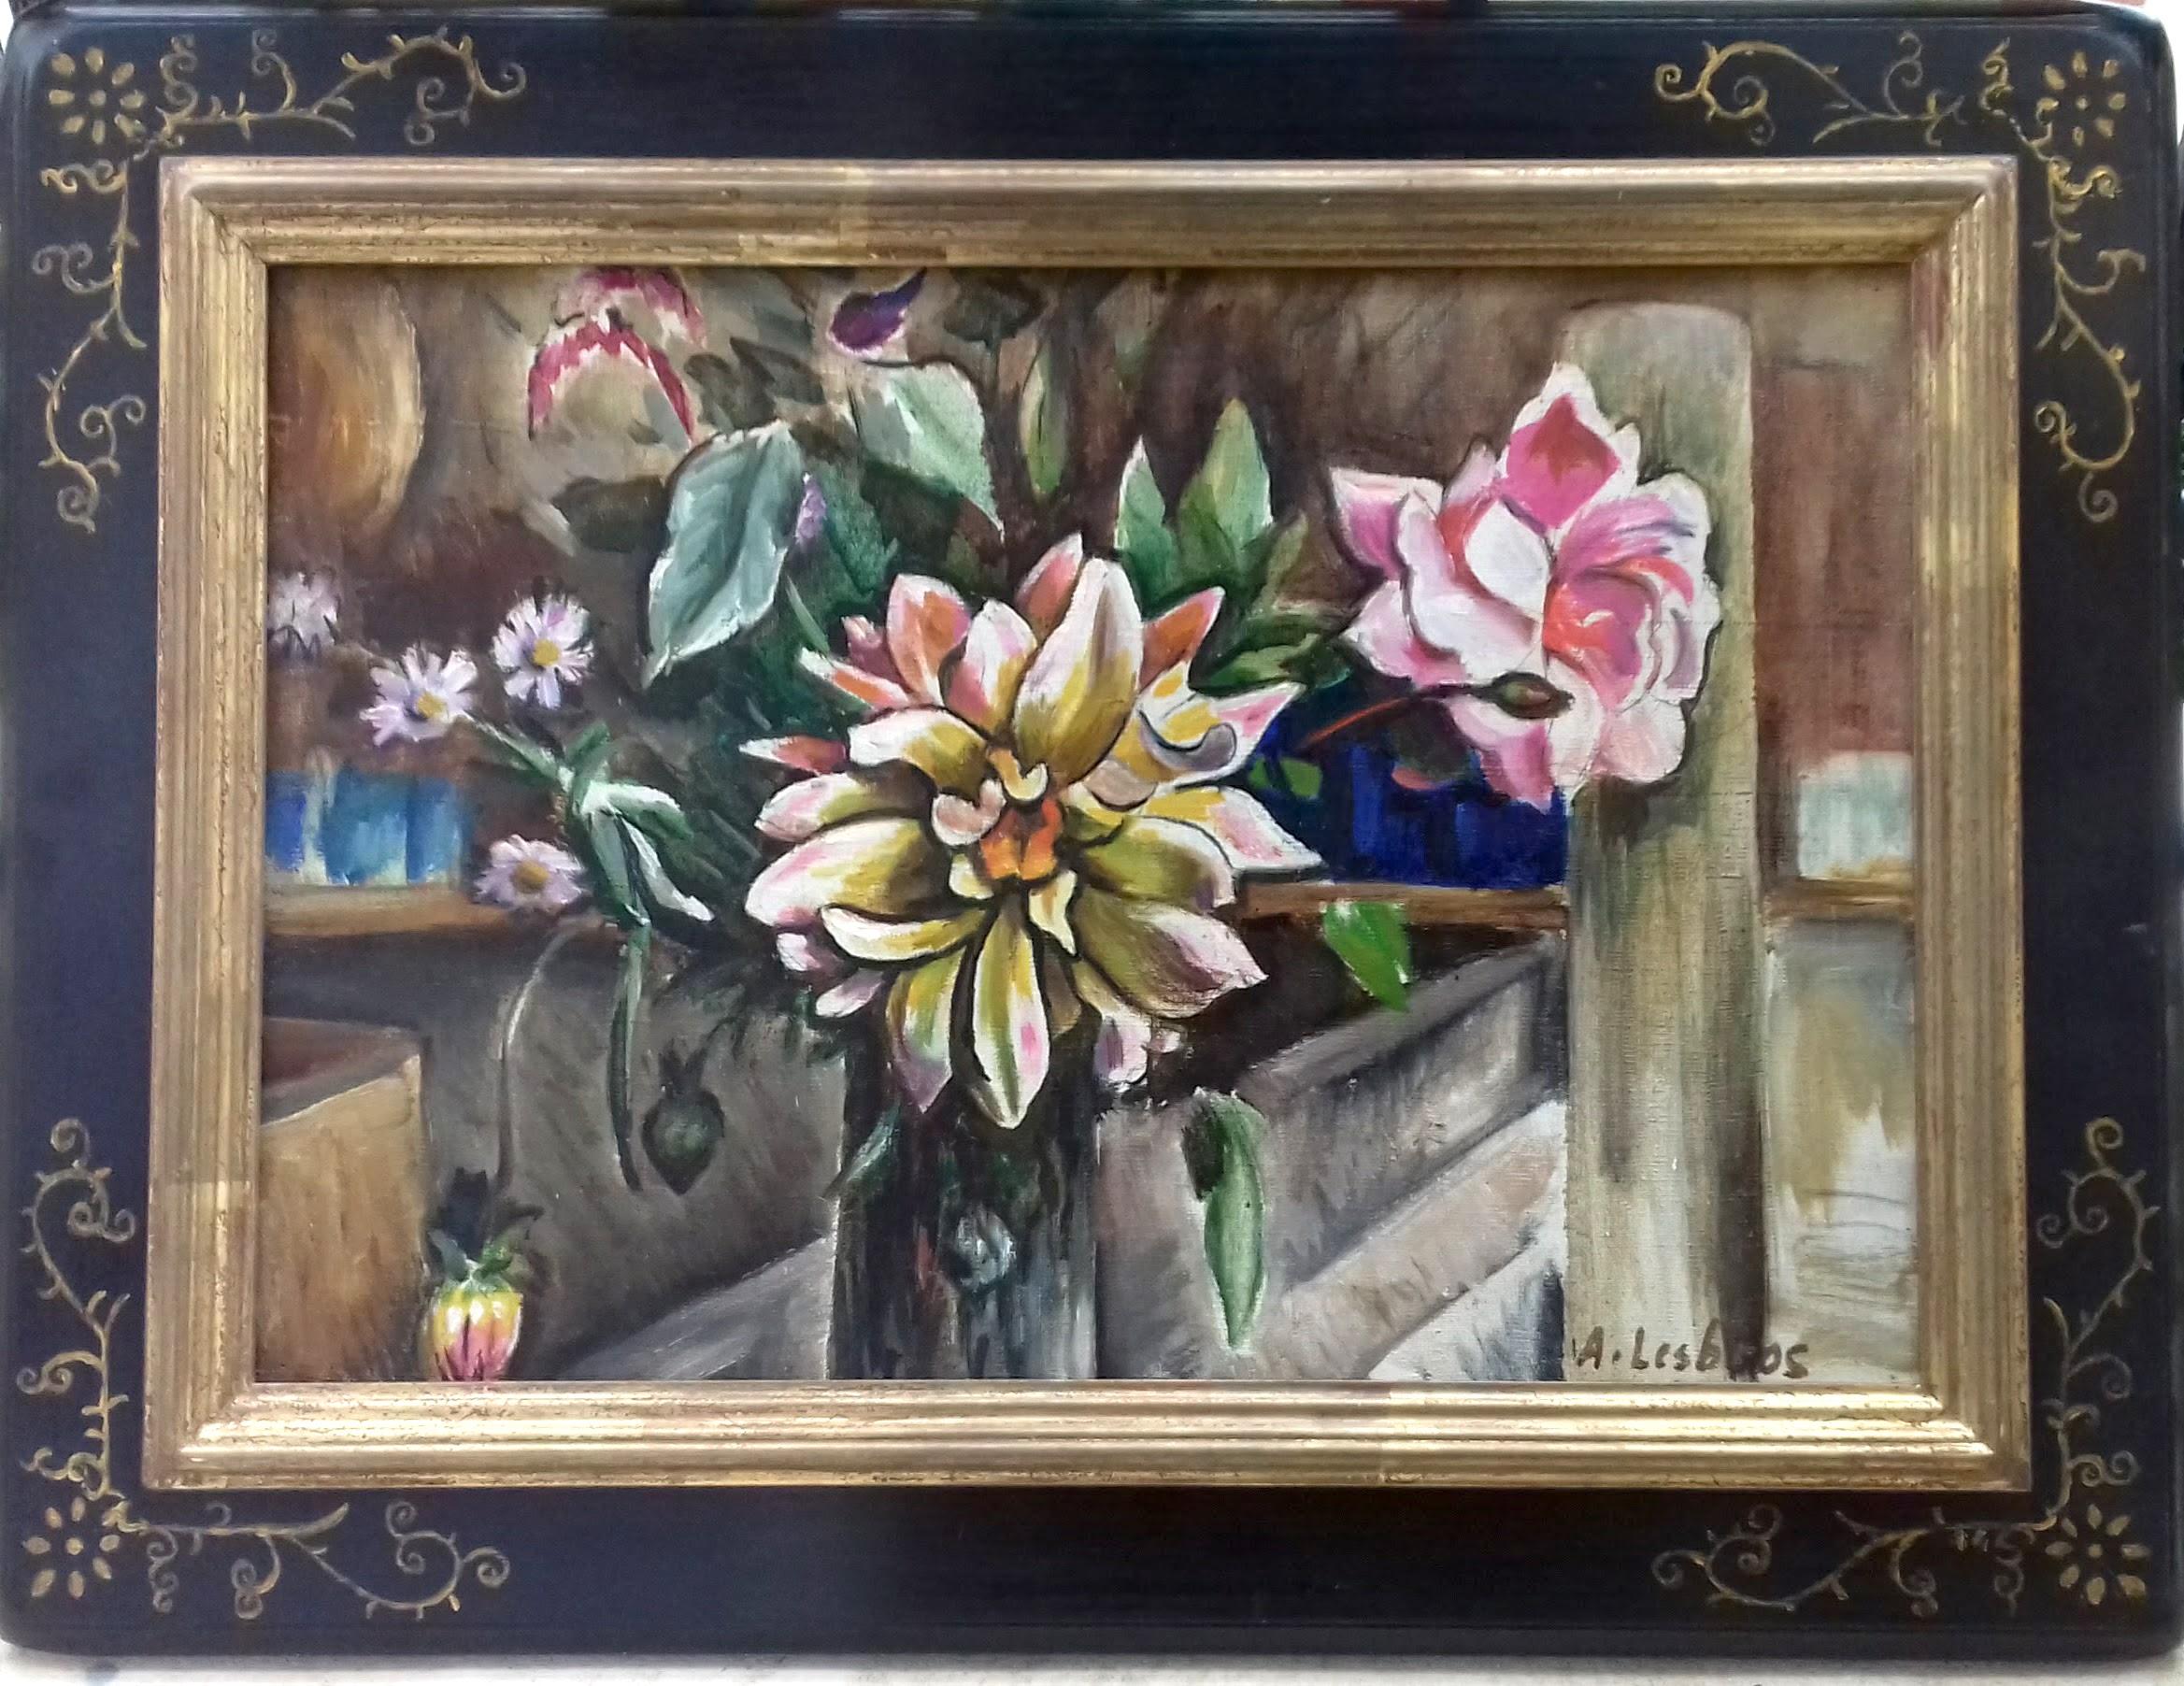 French Modernist Cubist Floral Still Life, Artist's studio art deco Flowers  - Painting by Alfred Lesbros